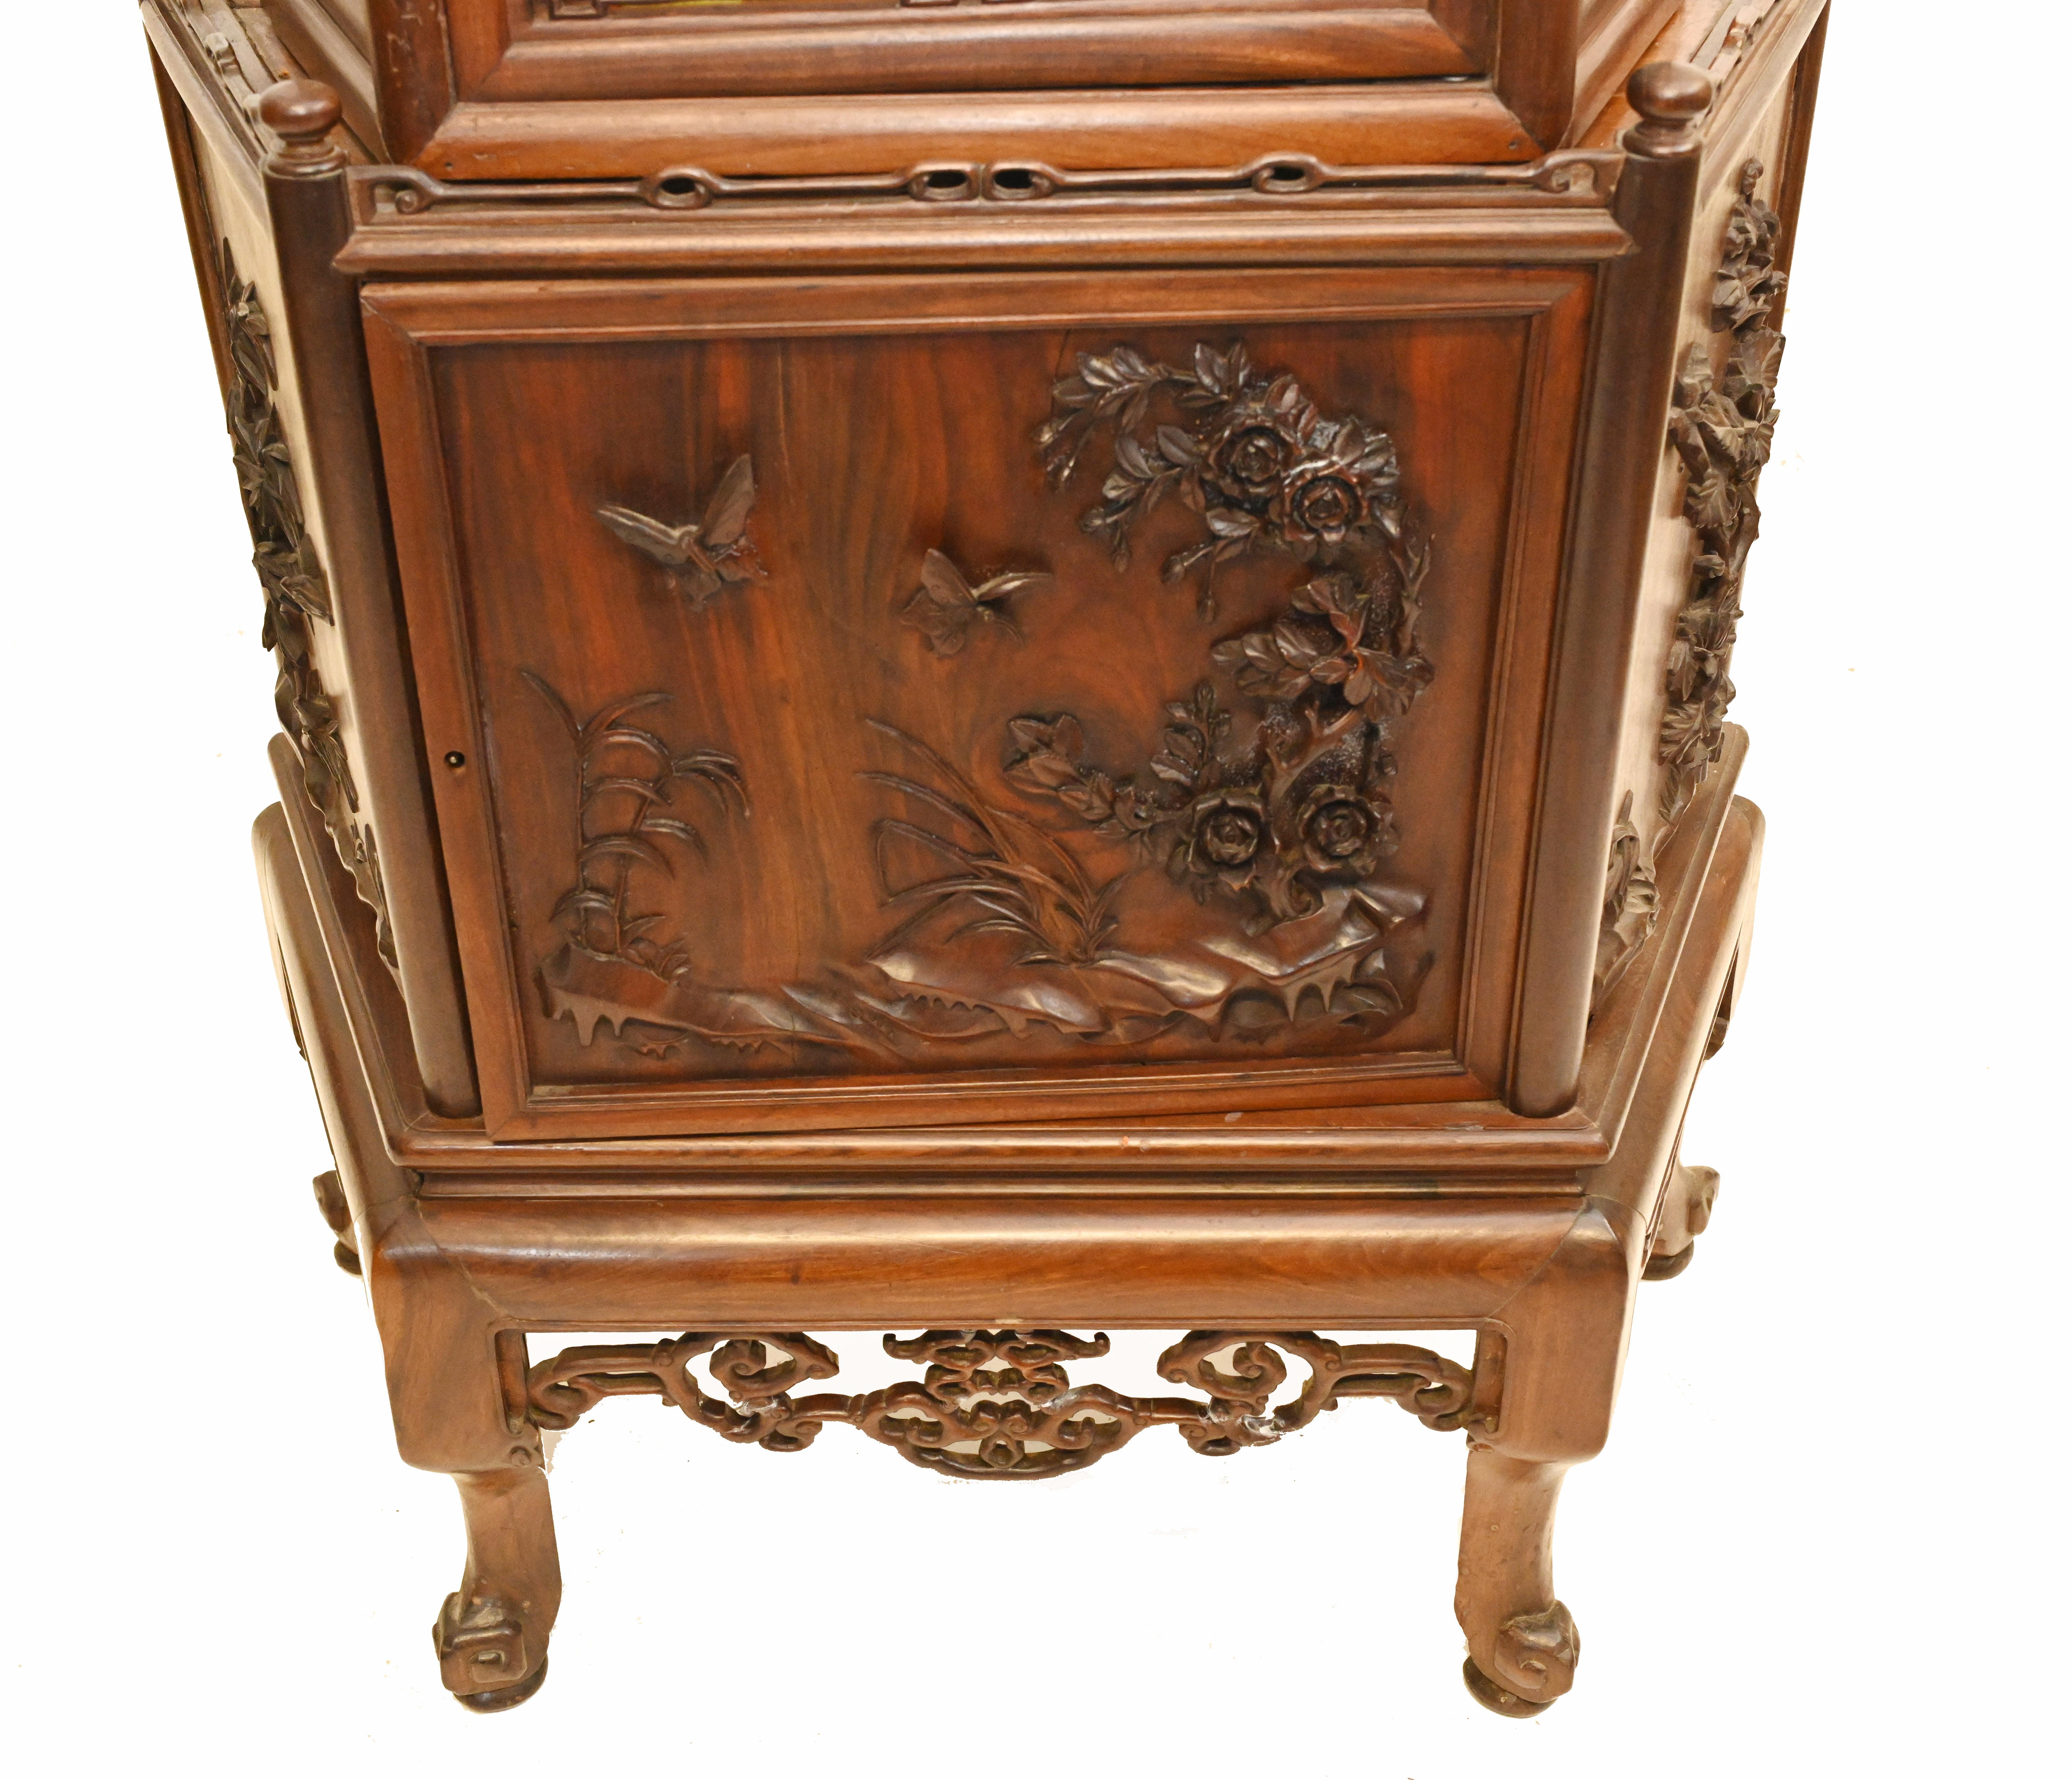 Gorgeous antique Chinese padauk hardwood display cabinet
Unusual work, our attention was initially drawn to the fact that the carving is deep relief from the solid wood and not applied
Great as a display cabinet or bookcase
Carved details are